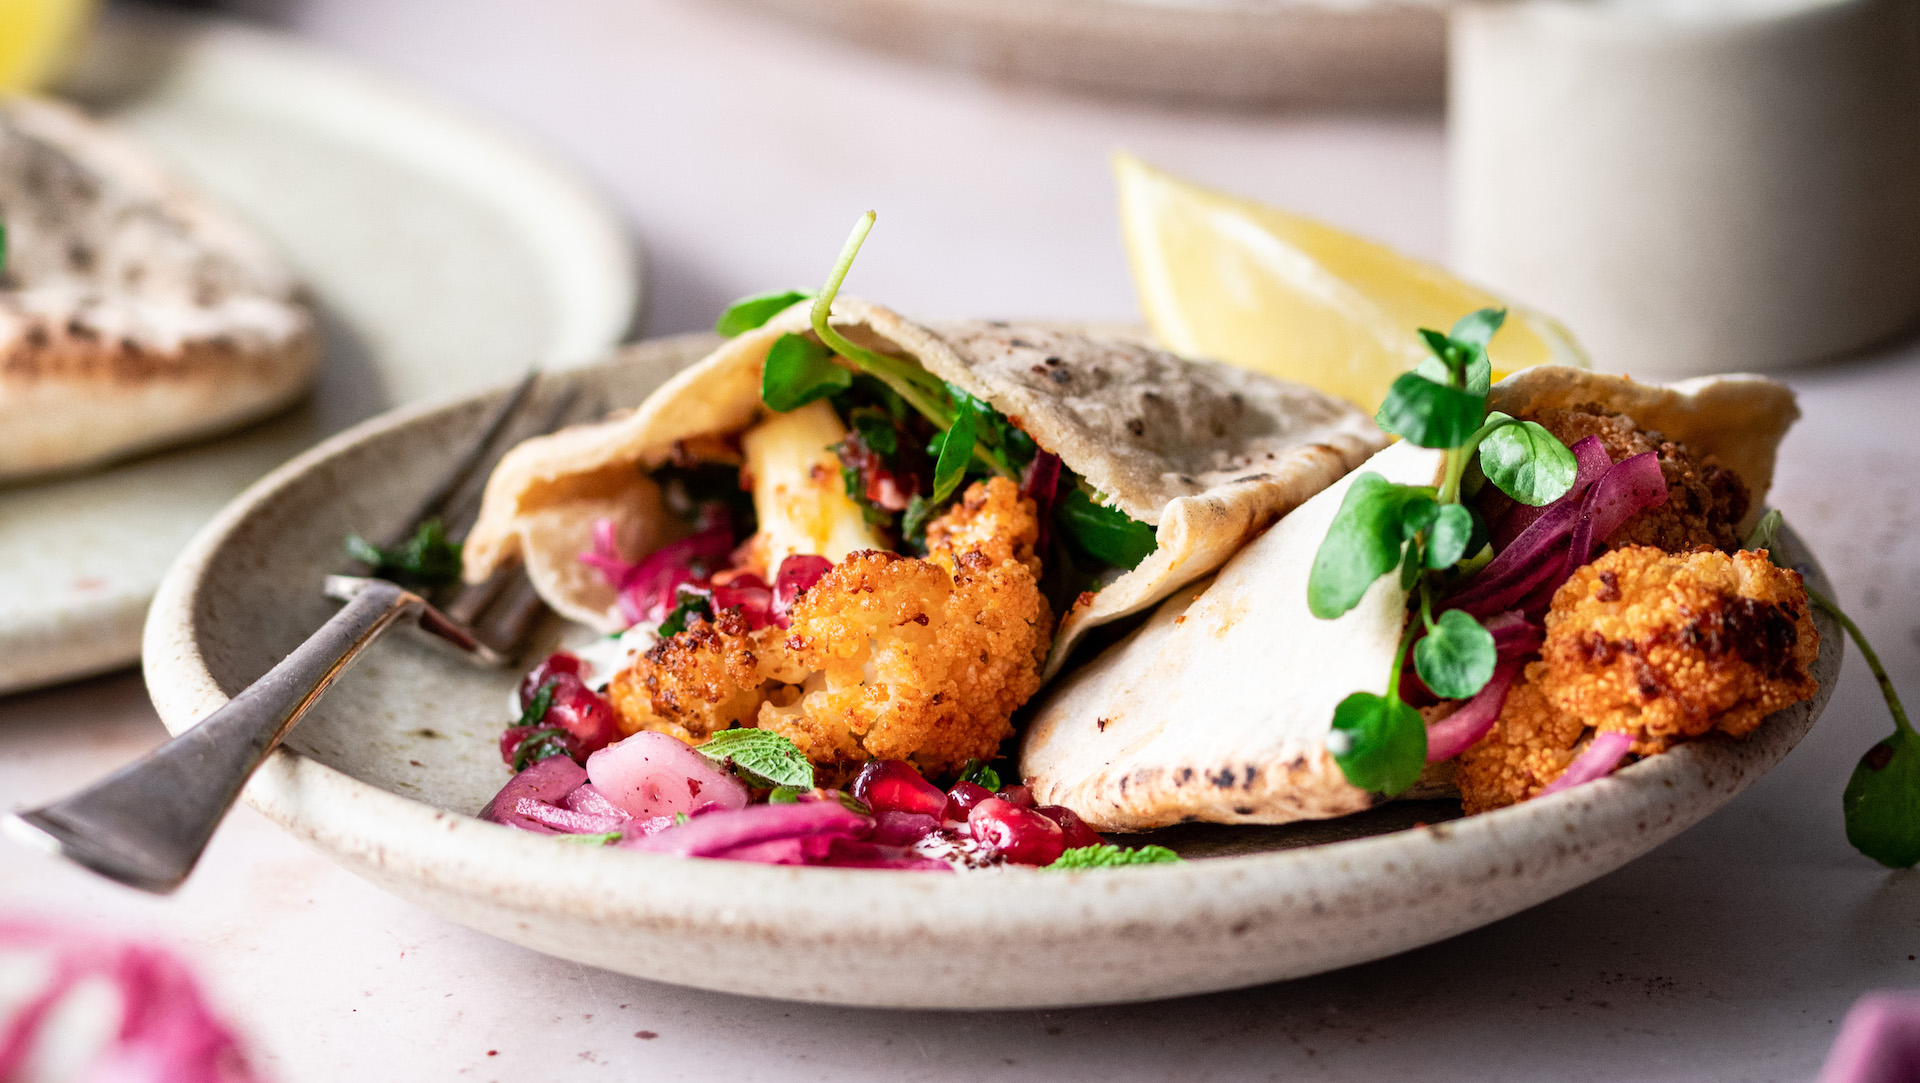 A pita bread stuffed with colourful spiced cauliflower, red onions and served with a lemon wedge